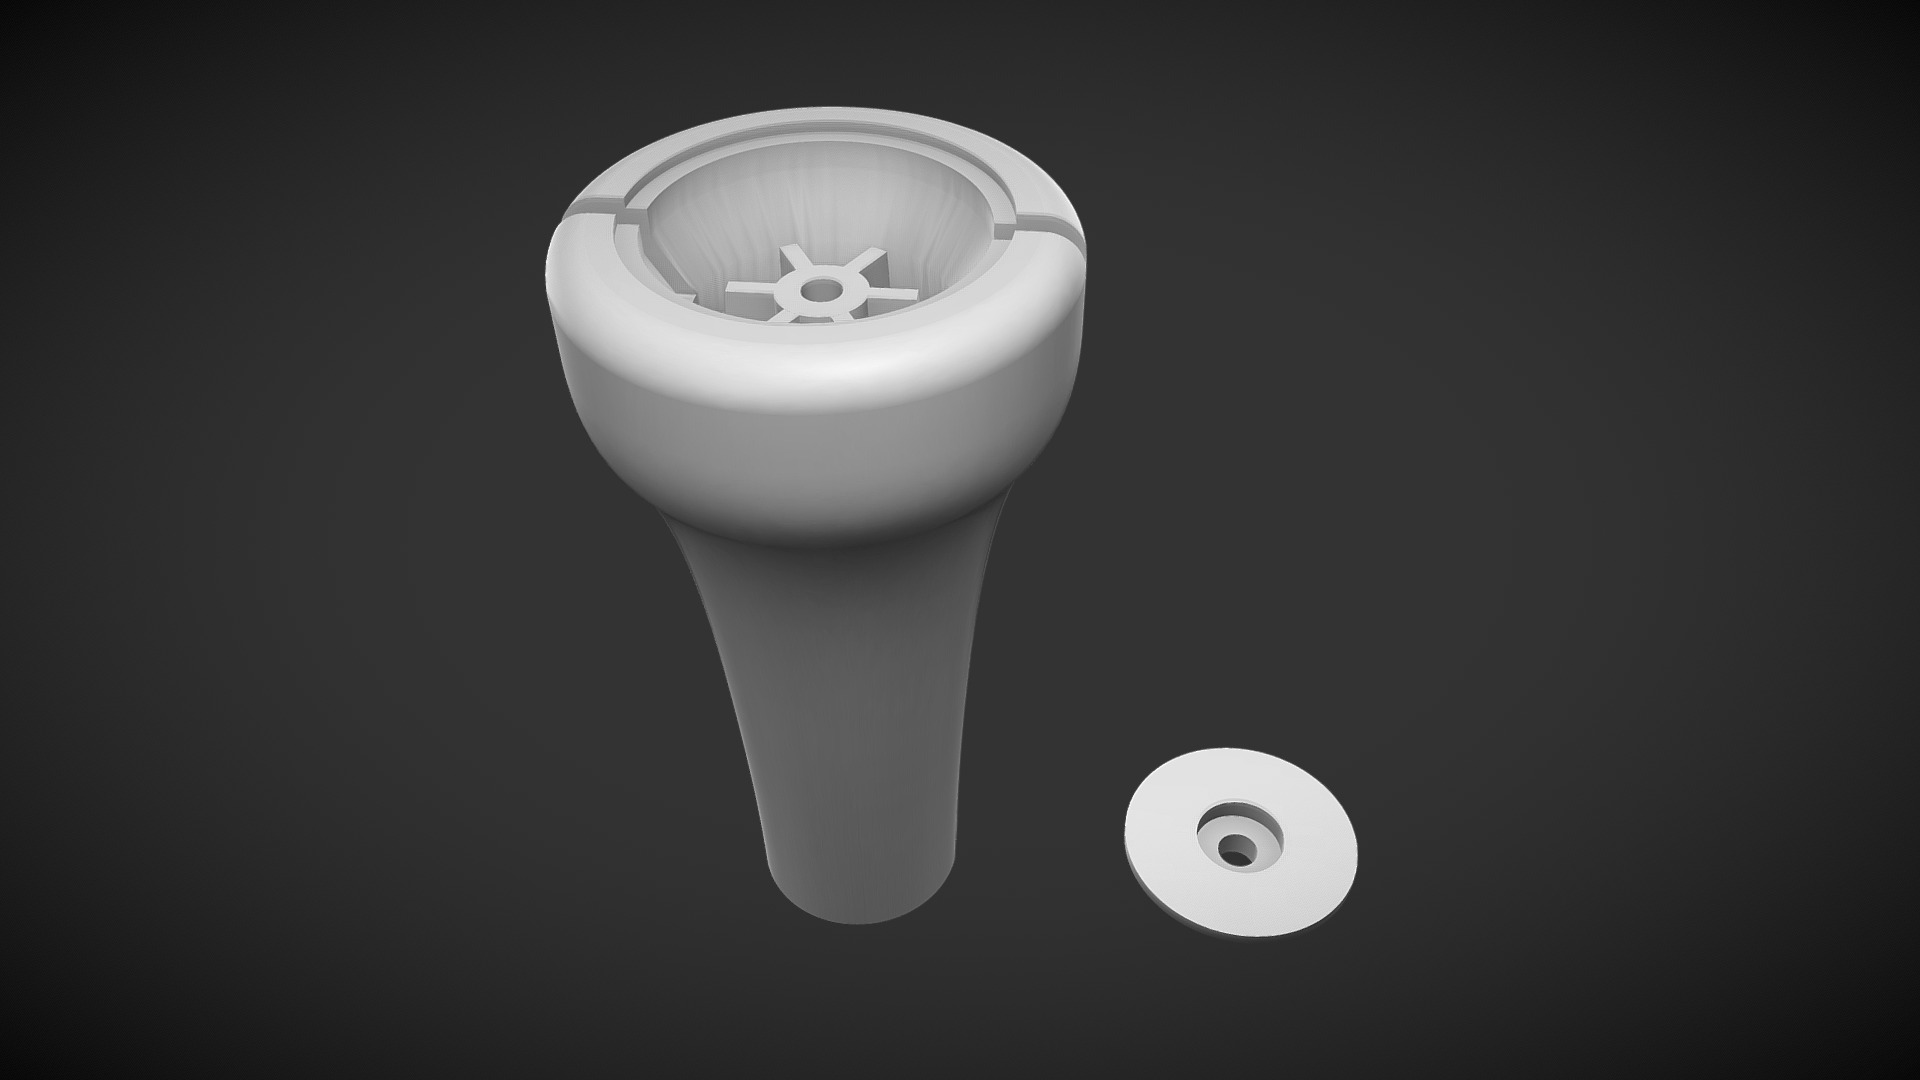 3D model E28 Gear Shift Knob 01 – 3D print - This is a 3D model of the E28 Gear Shift Knob 01 - 3D print. The 3D model is about a light bulb with a white circle.